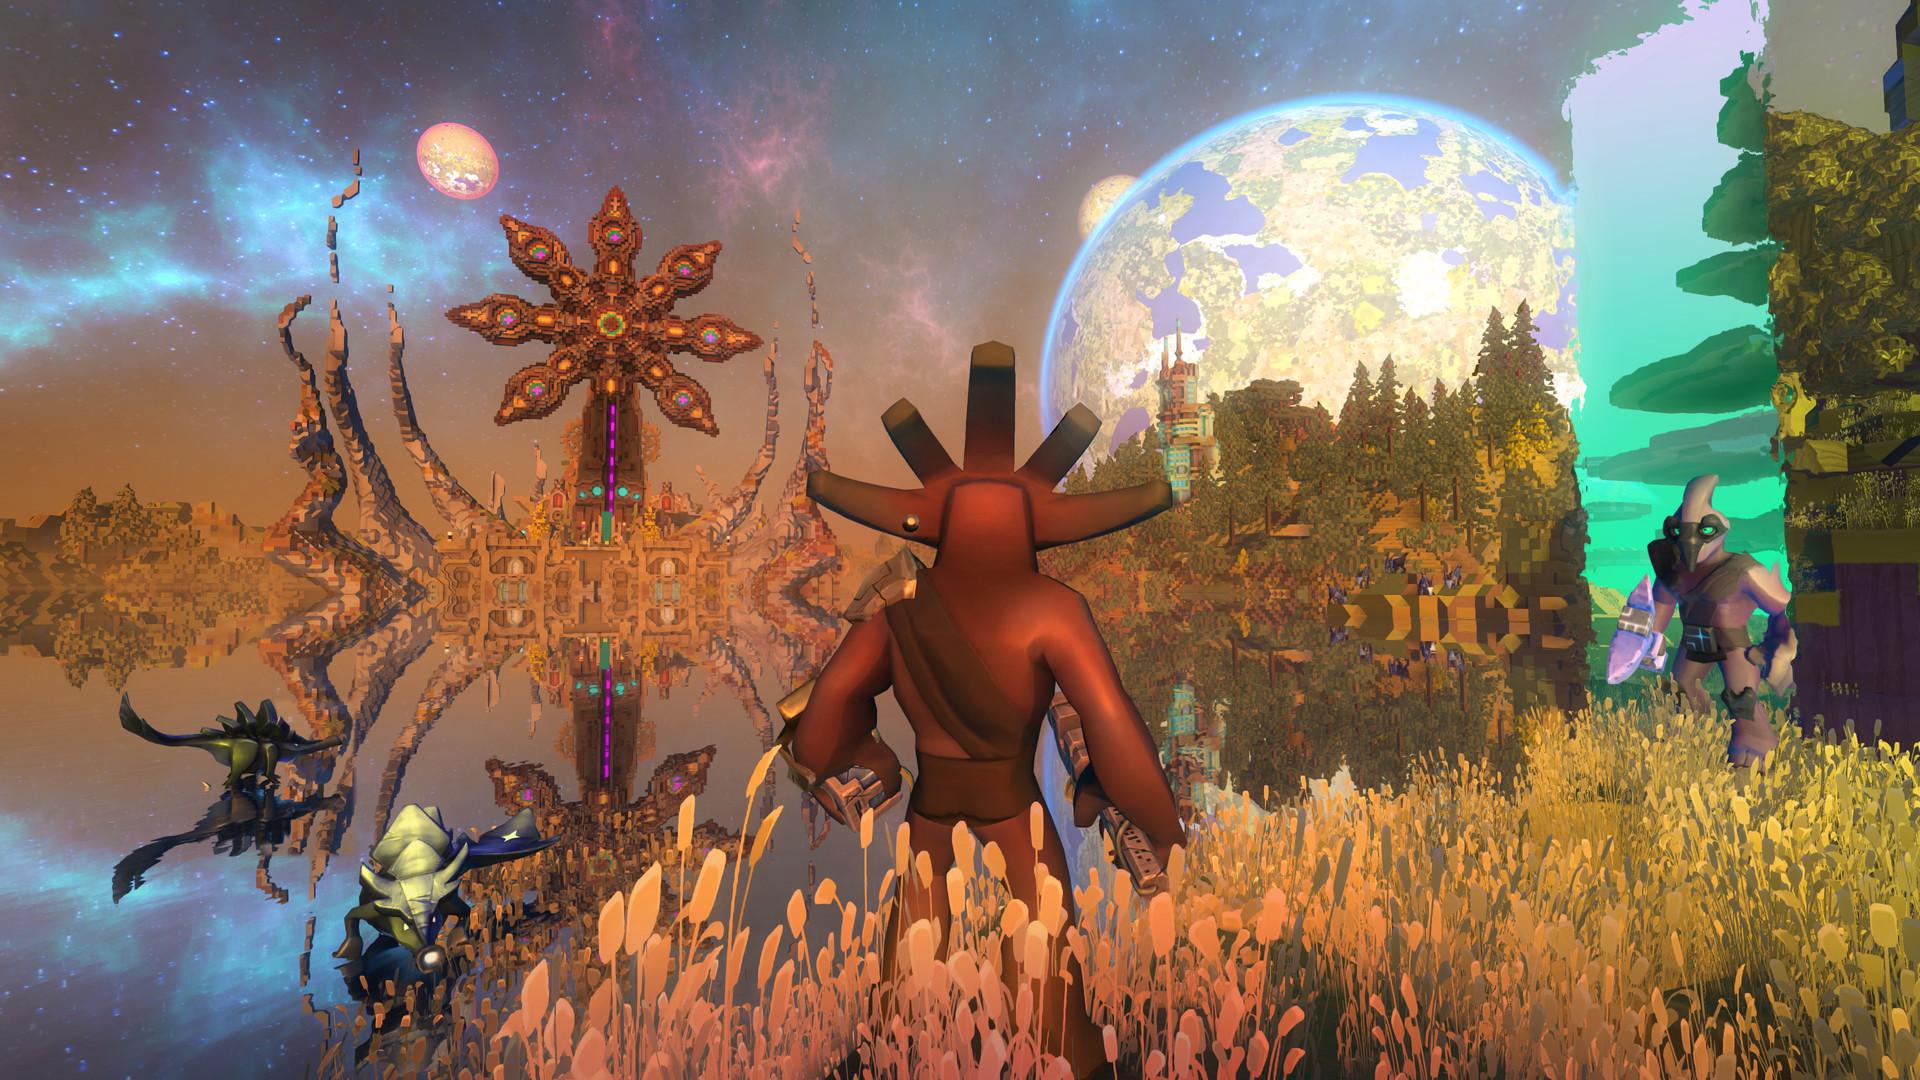 Screenshot №11 from game Boundless